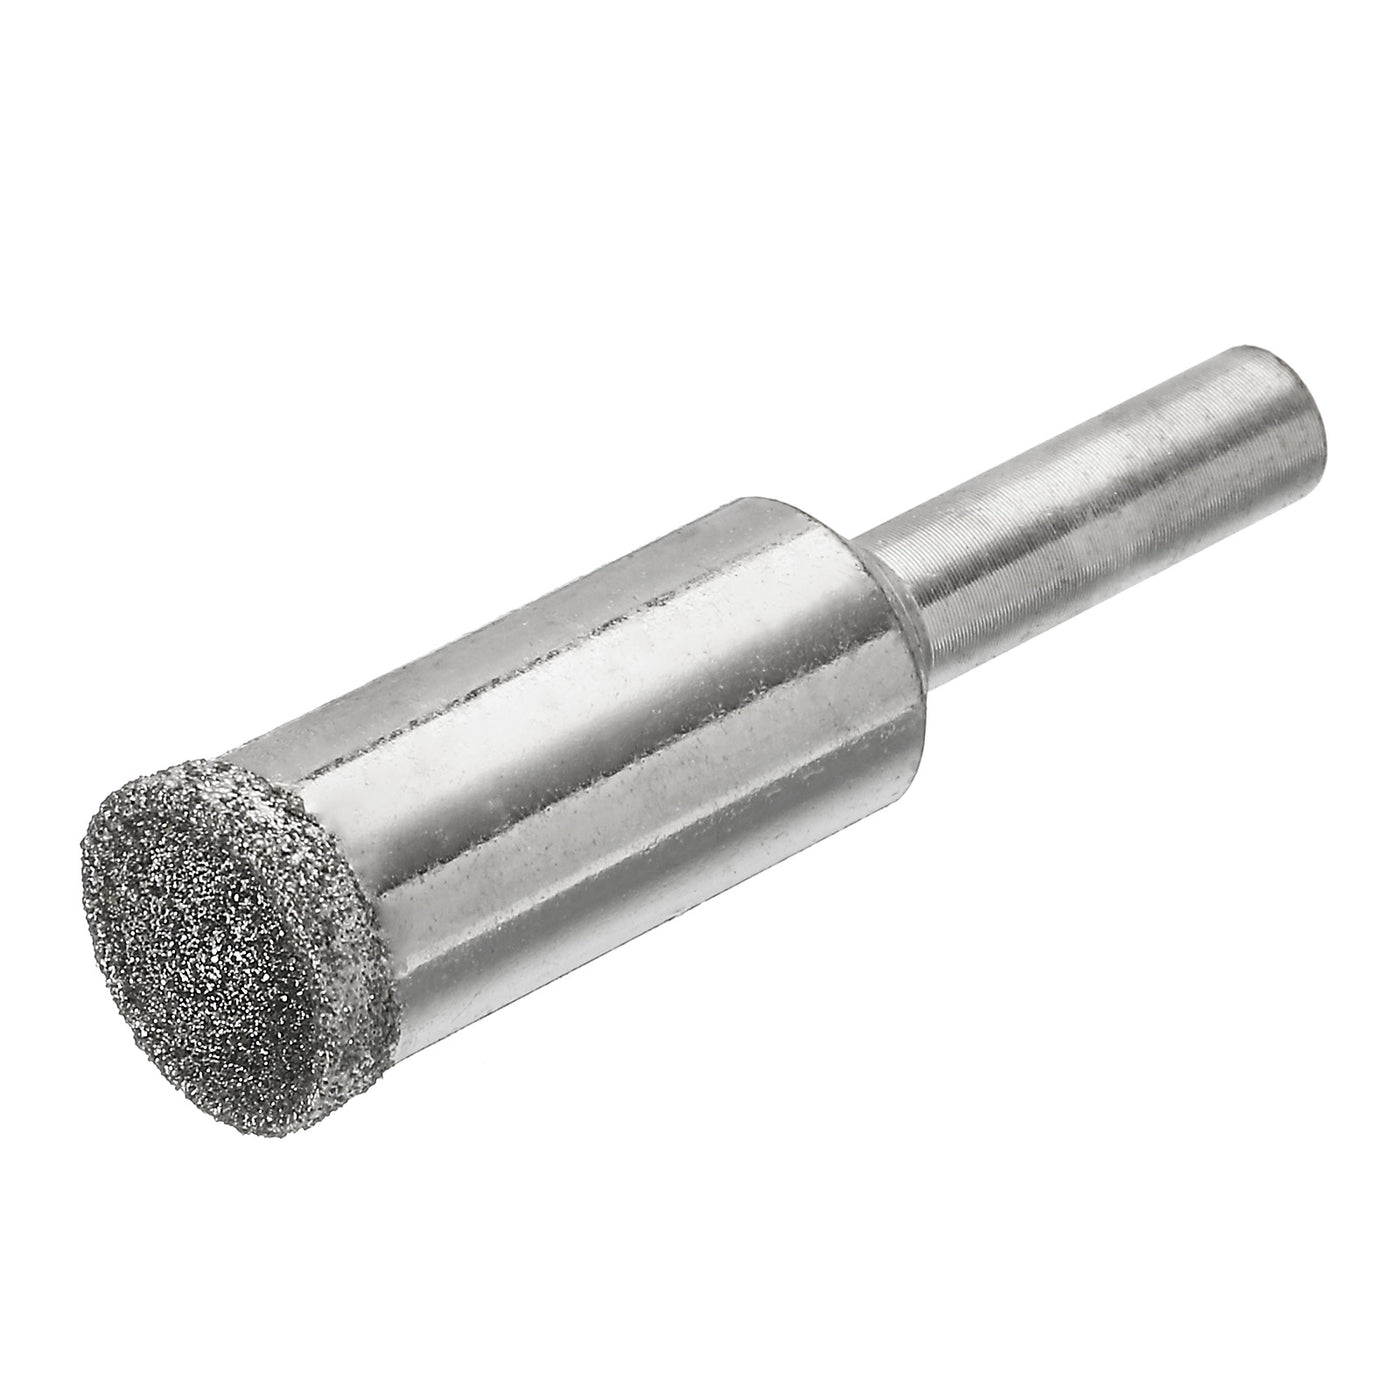 uxcell Uxcell 12mm 100 Grits Diamond Mounted Point Spherical Concave Head Bead Grinding Bit